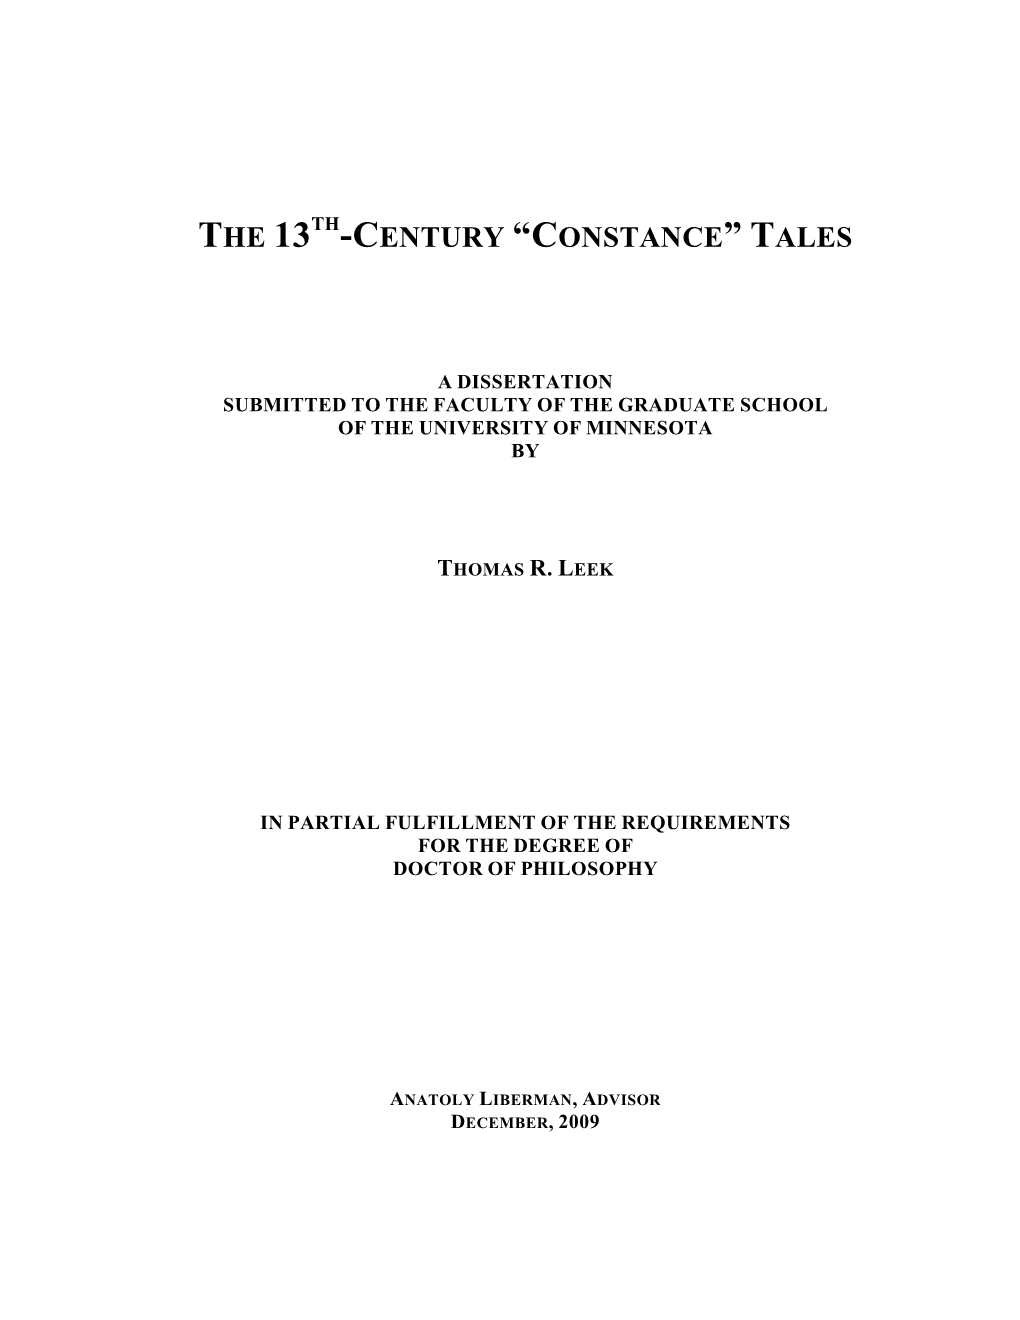 The 13 -Century “Constance” Tales